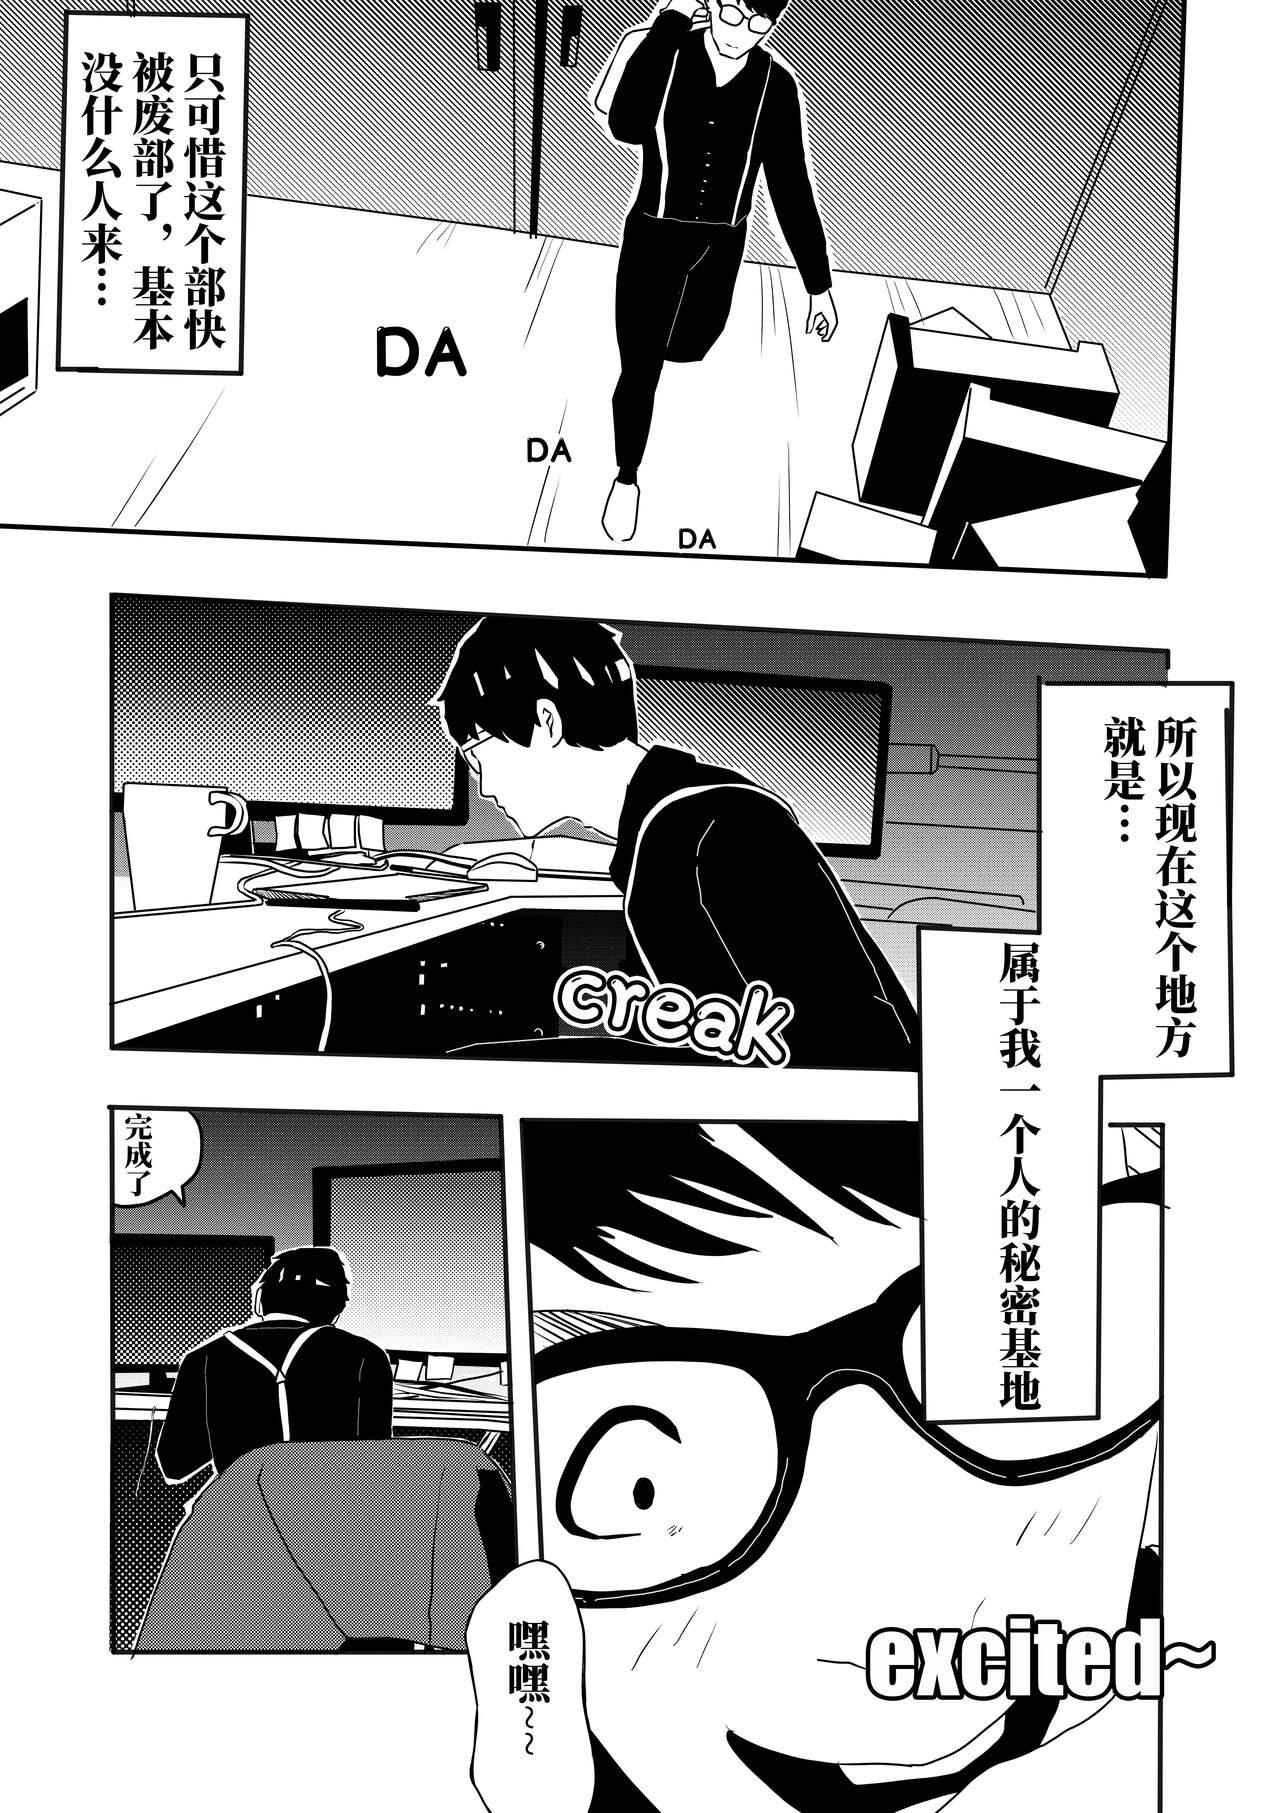 Hidden Camera [KAO.YELLOW STUDIO (T.C.X)] I must be out of my mind to fall in love with SAORI, the Snuff Queen Ch.1-16 | 想与冰恋女王纱织同学谈恋爱的我脑子一定有问题 第1-16话 [Chinese] - Original Old And Young - Page 5